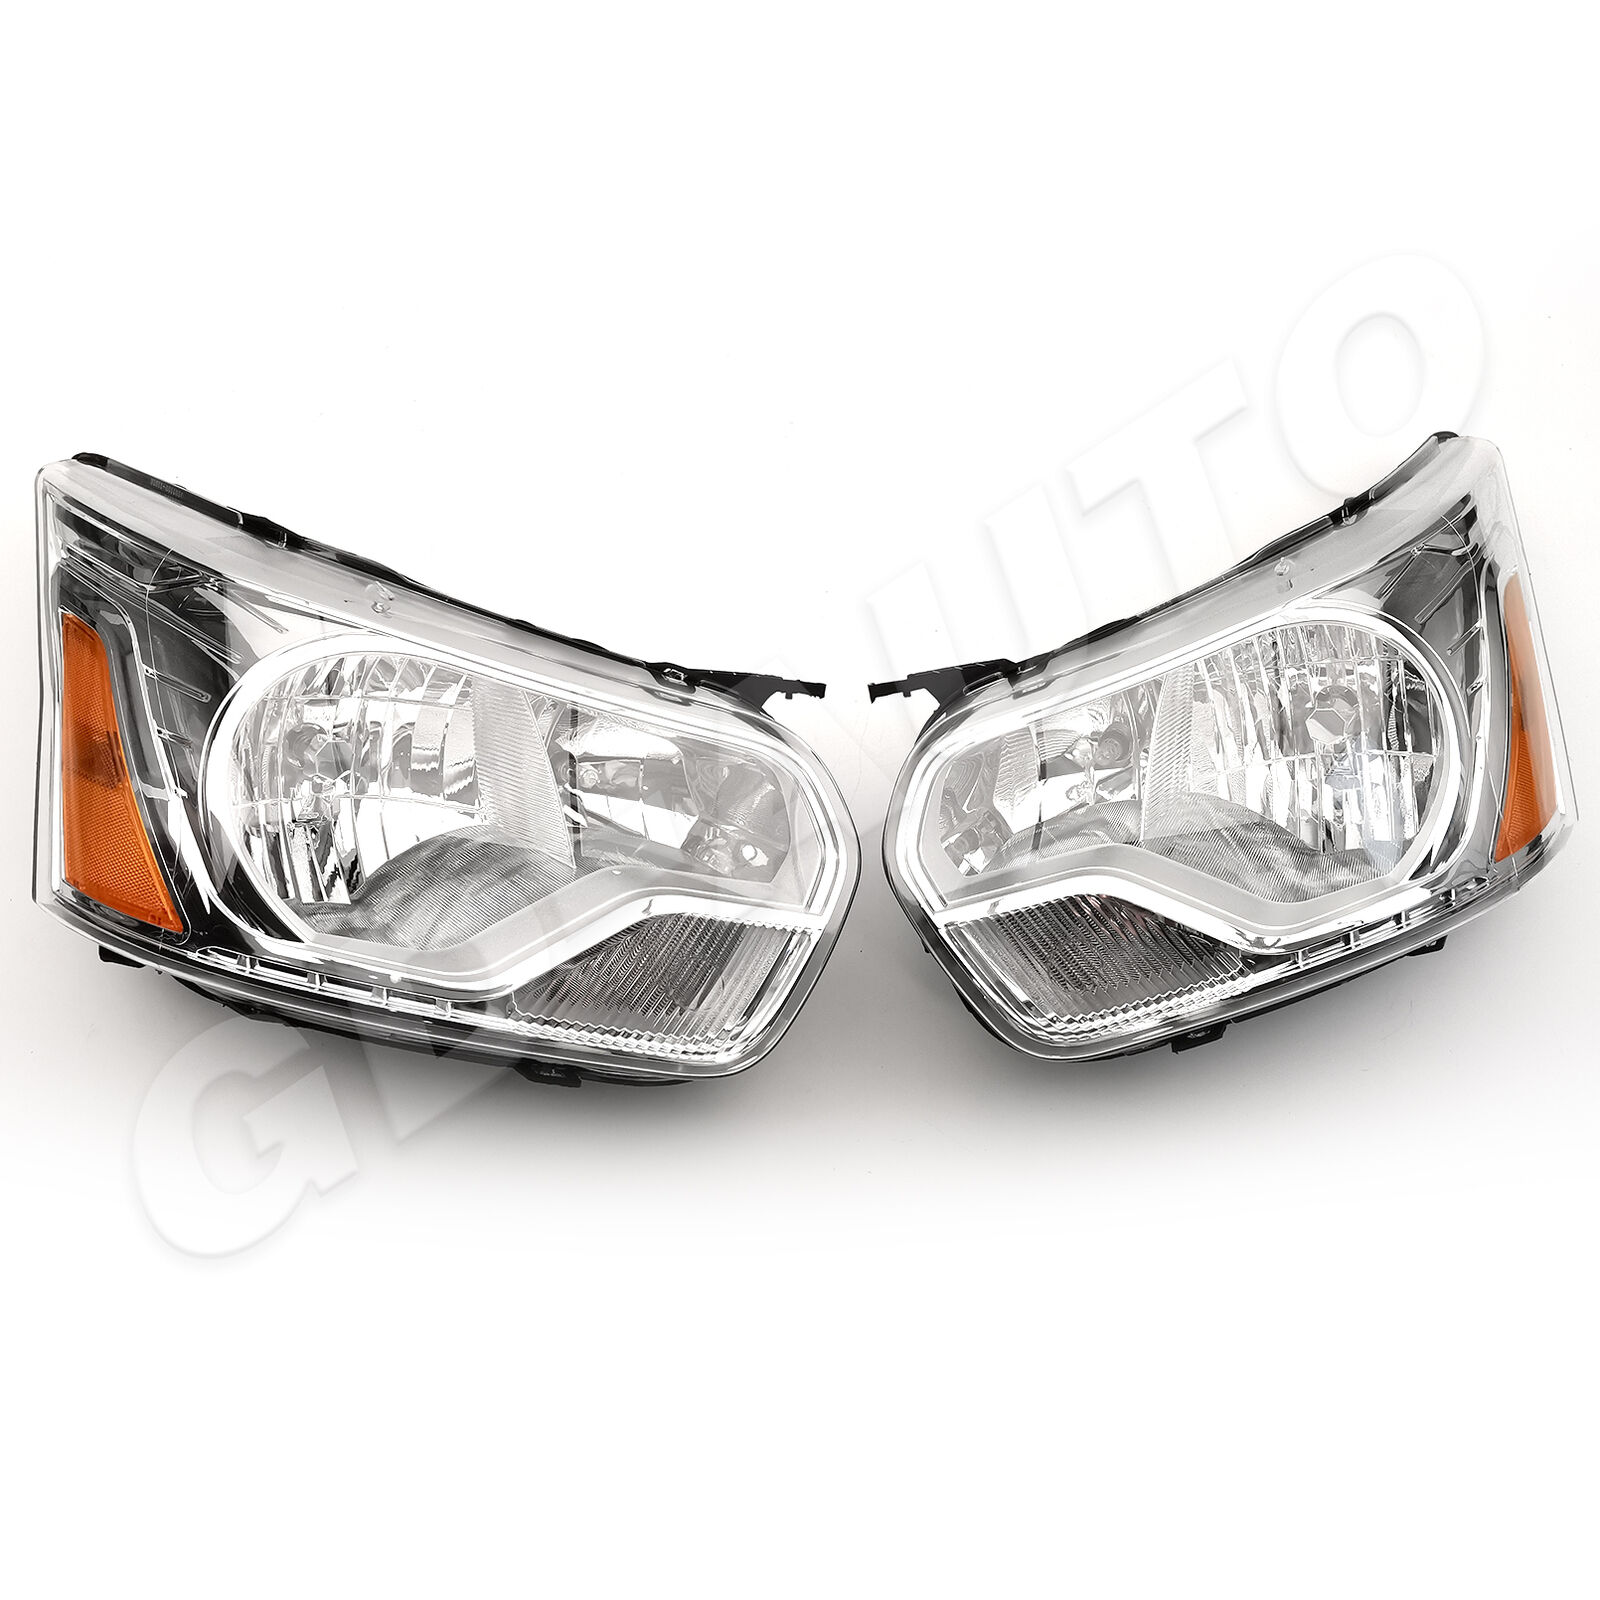 For 2014-2022 Ford Transit 150 250 350 Headlight Headlamp Left & Right Side Pair